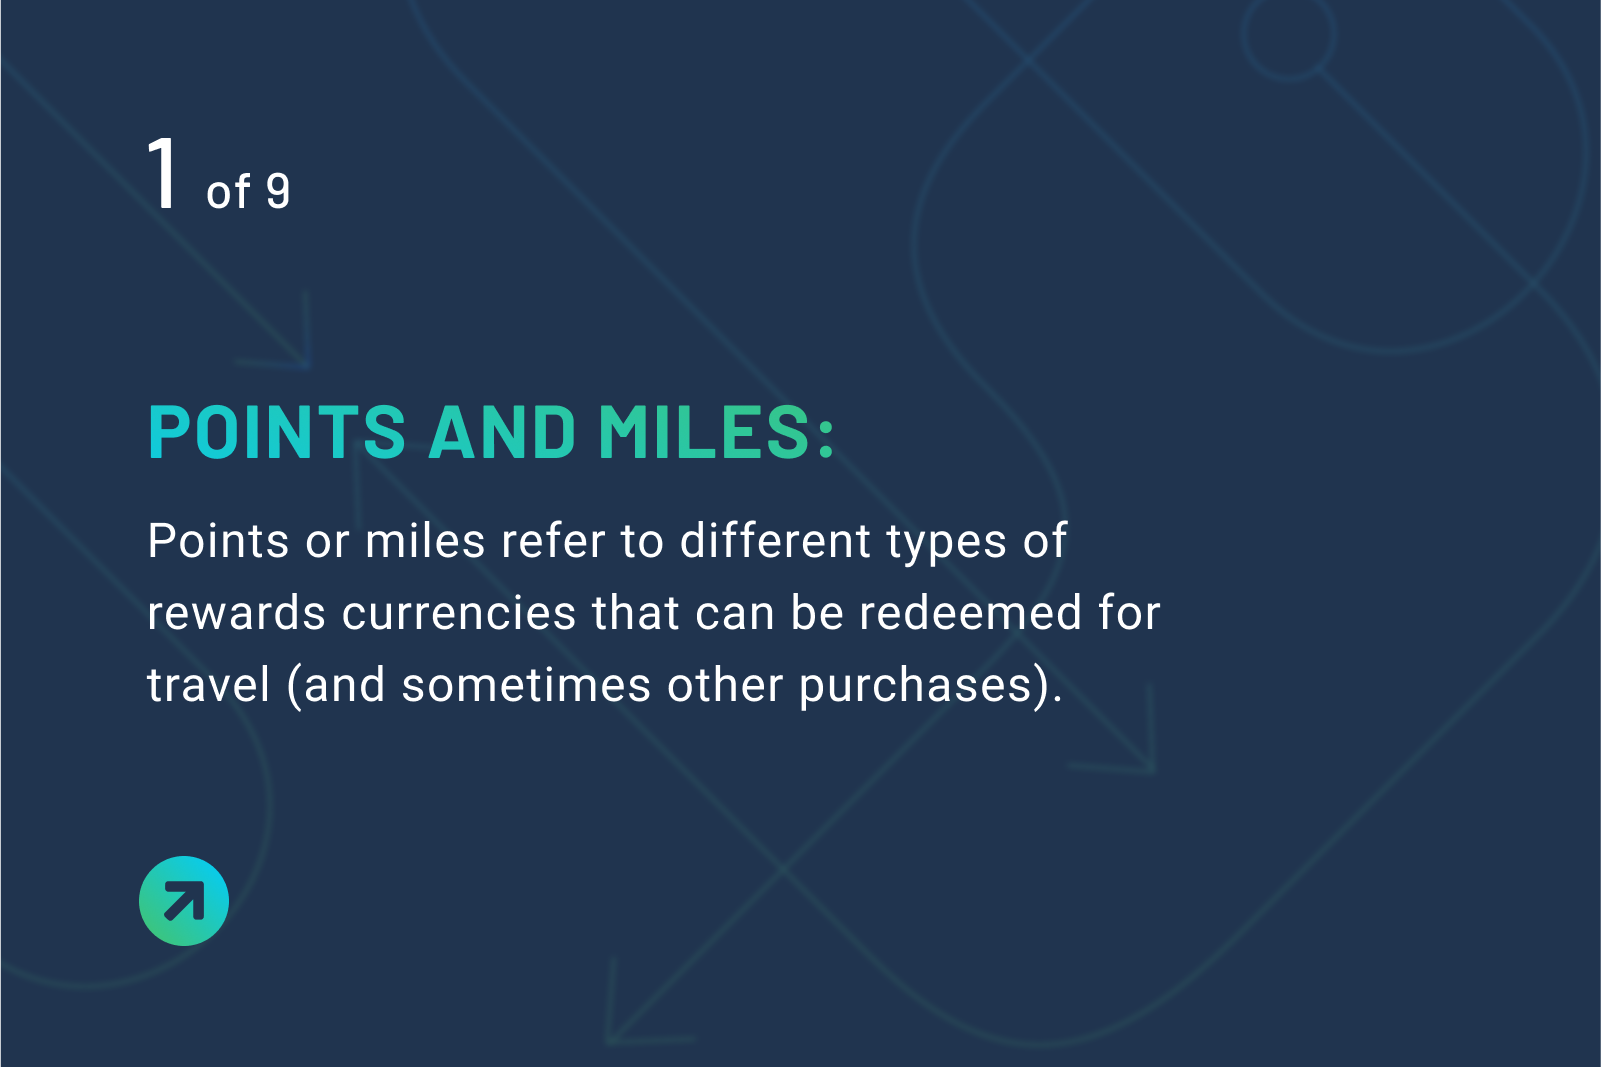 Points and miles definition: Points or miles refer to different types of rewards currencies that can be redeemed for travel (and sometimes other purchases).